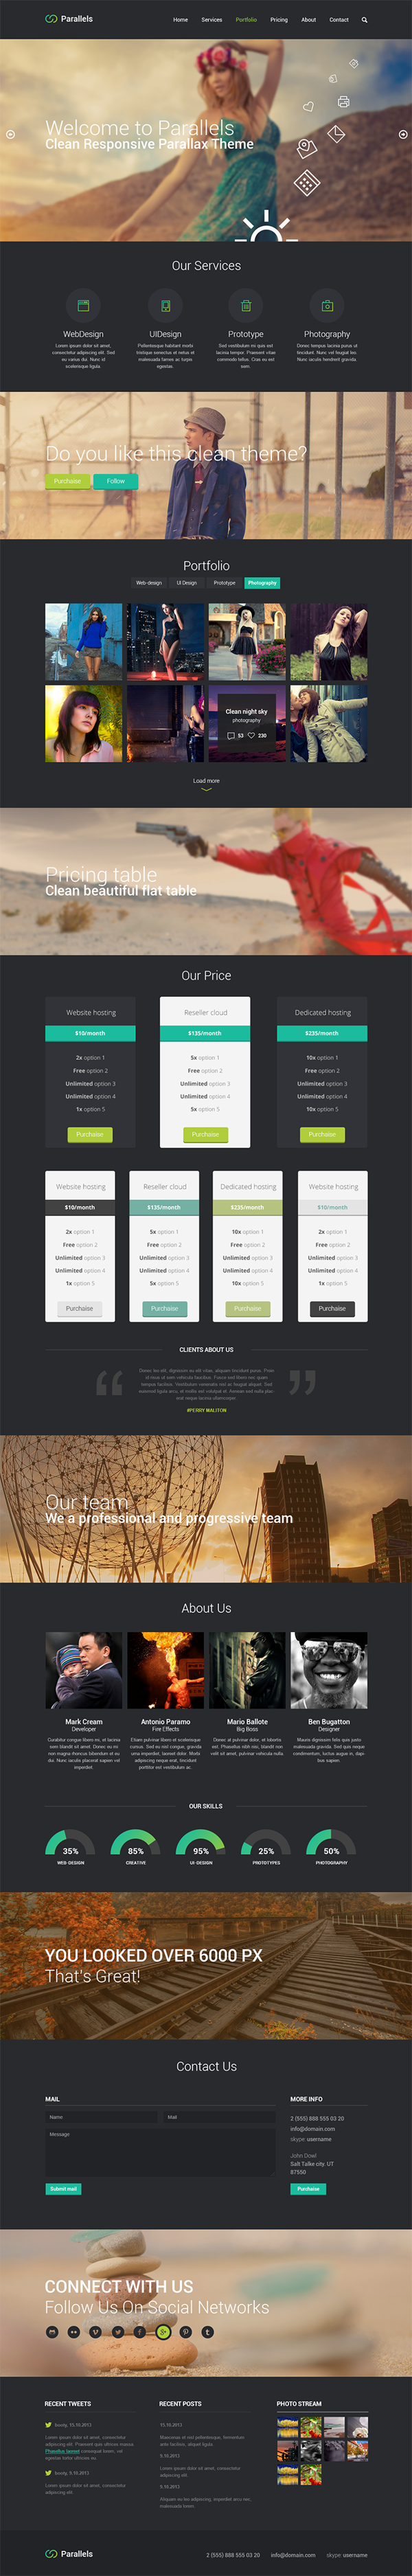 Free PSD Responsive Template